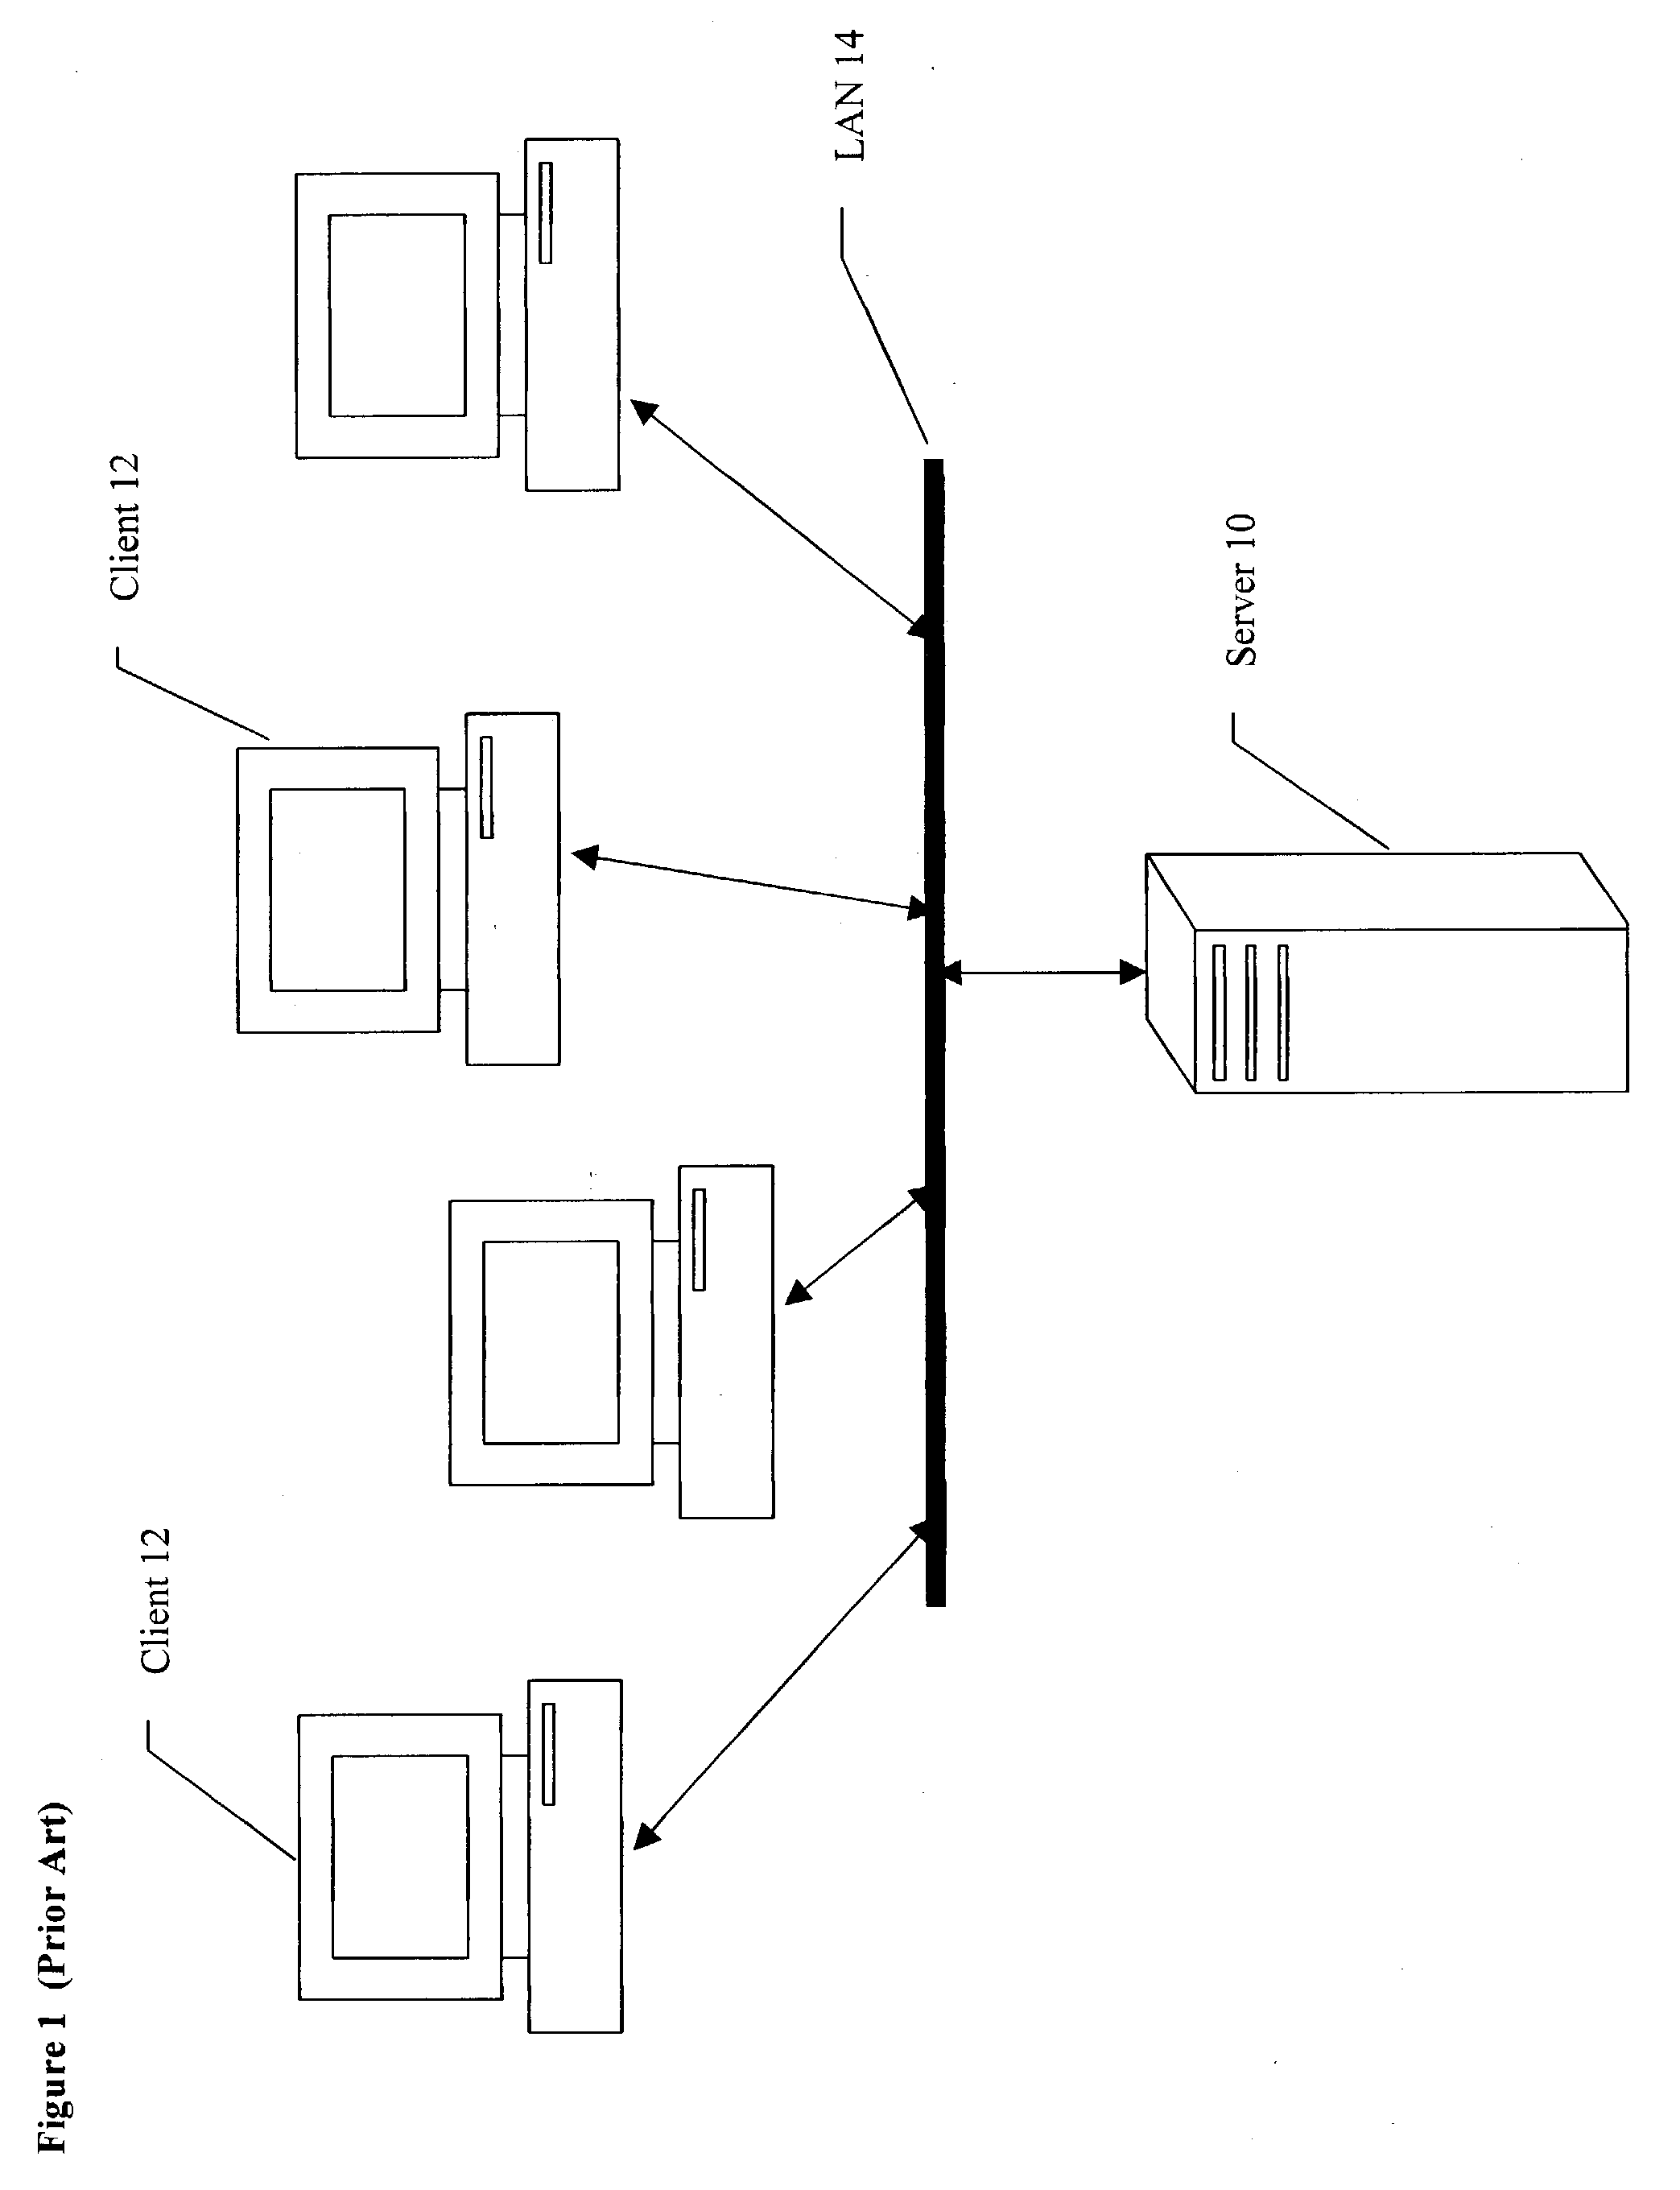 System and method of managing backup media in a computing environment